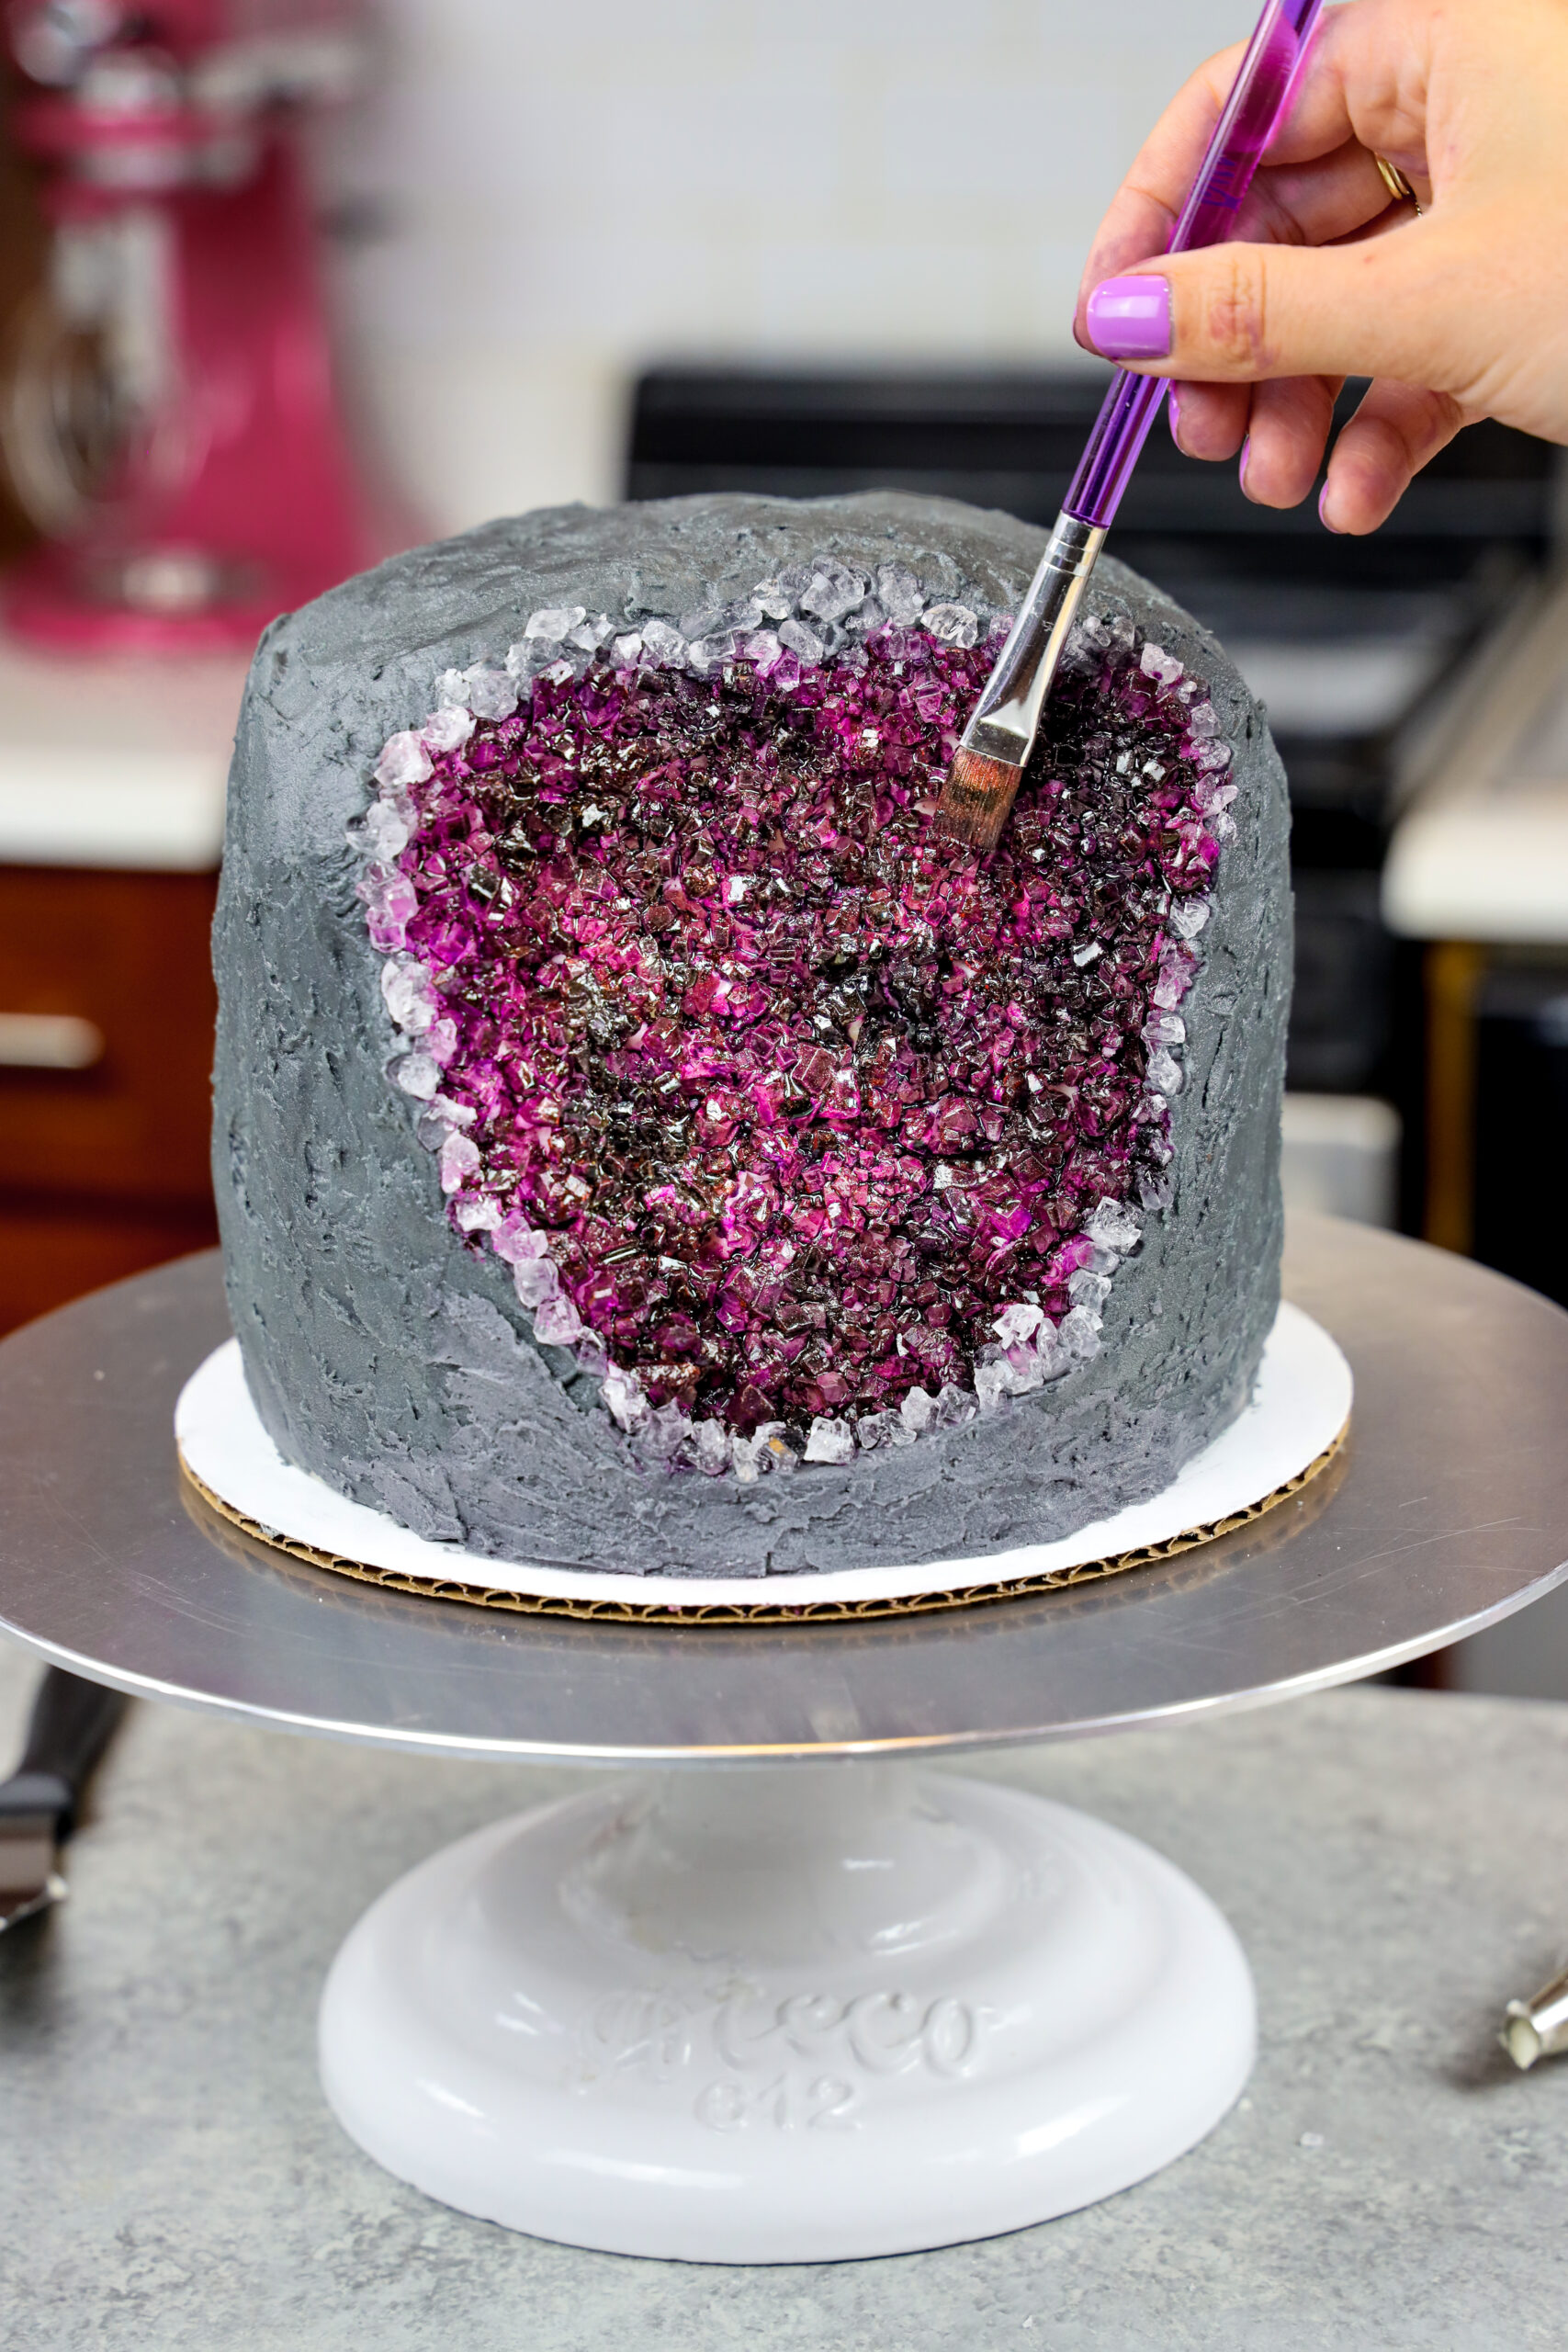 PHOTOS: These Gorgeous Cakes Are Made From Cotton Candy, Here's How